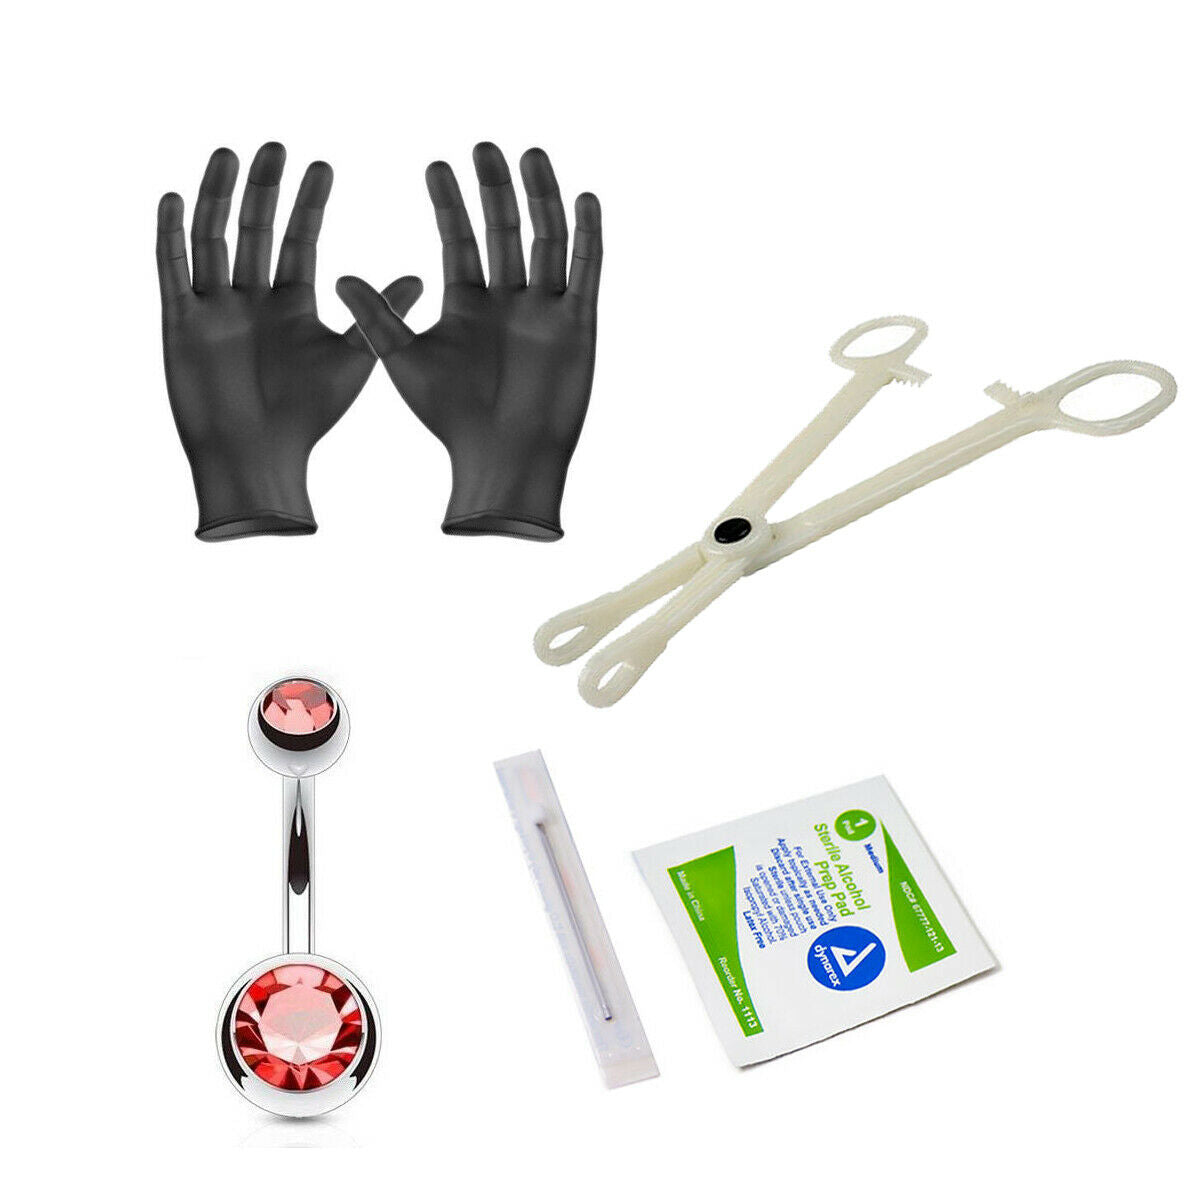 Body Piercing Kit Belly Ring 14 Gauge Clamps, Needles, Gloves And Jewelry